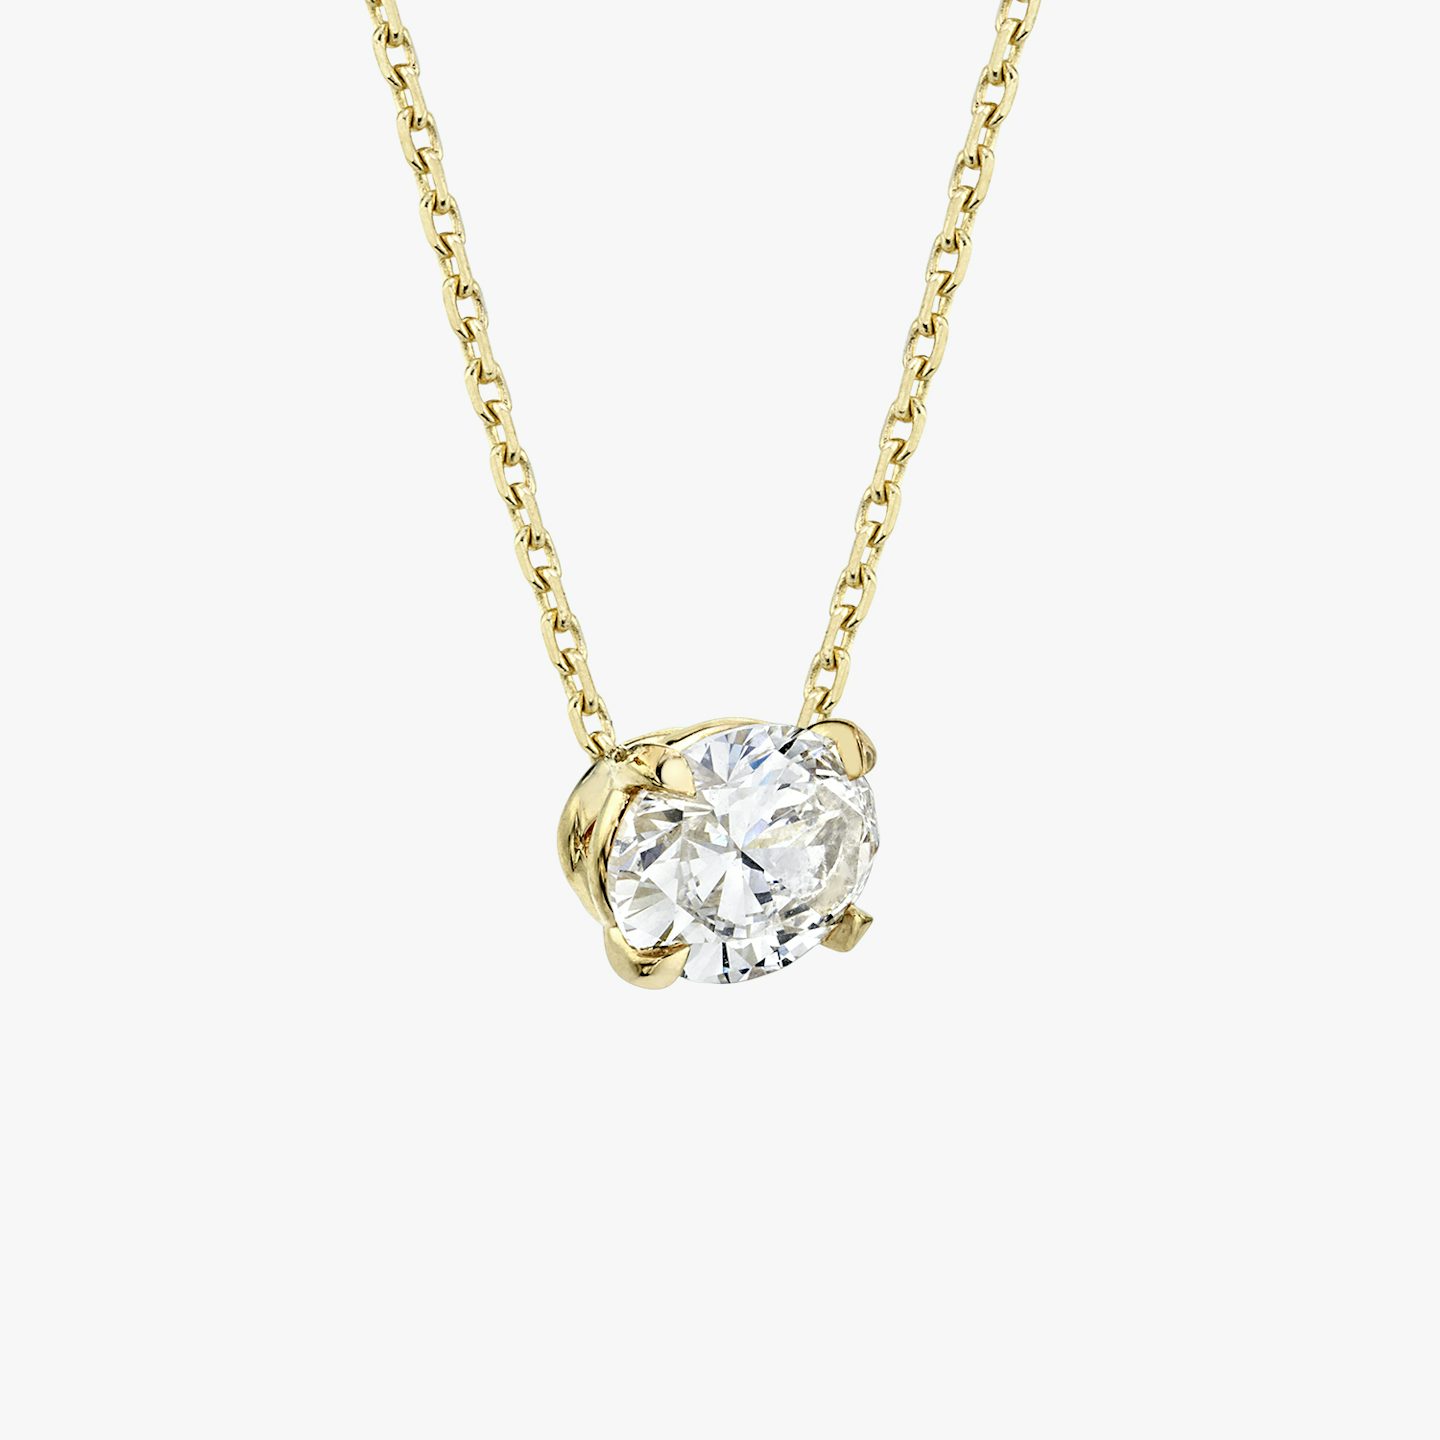 VRAI Solitaire Necklace | Oval | 14k | Yellow Gold | caratWeight: 1.0ct